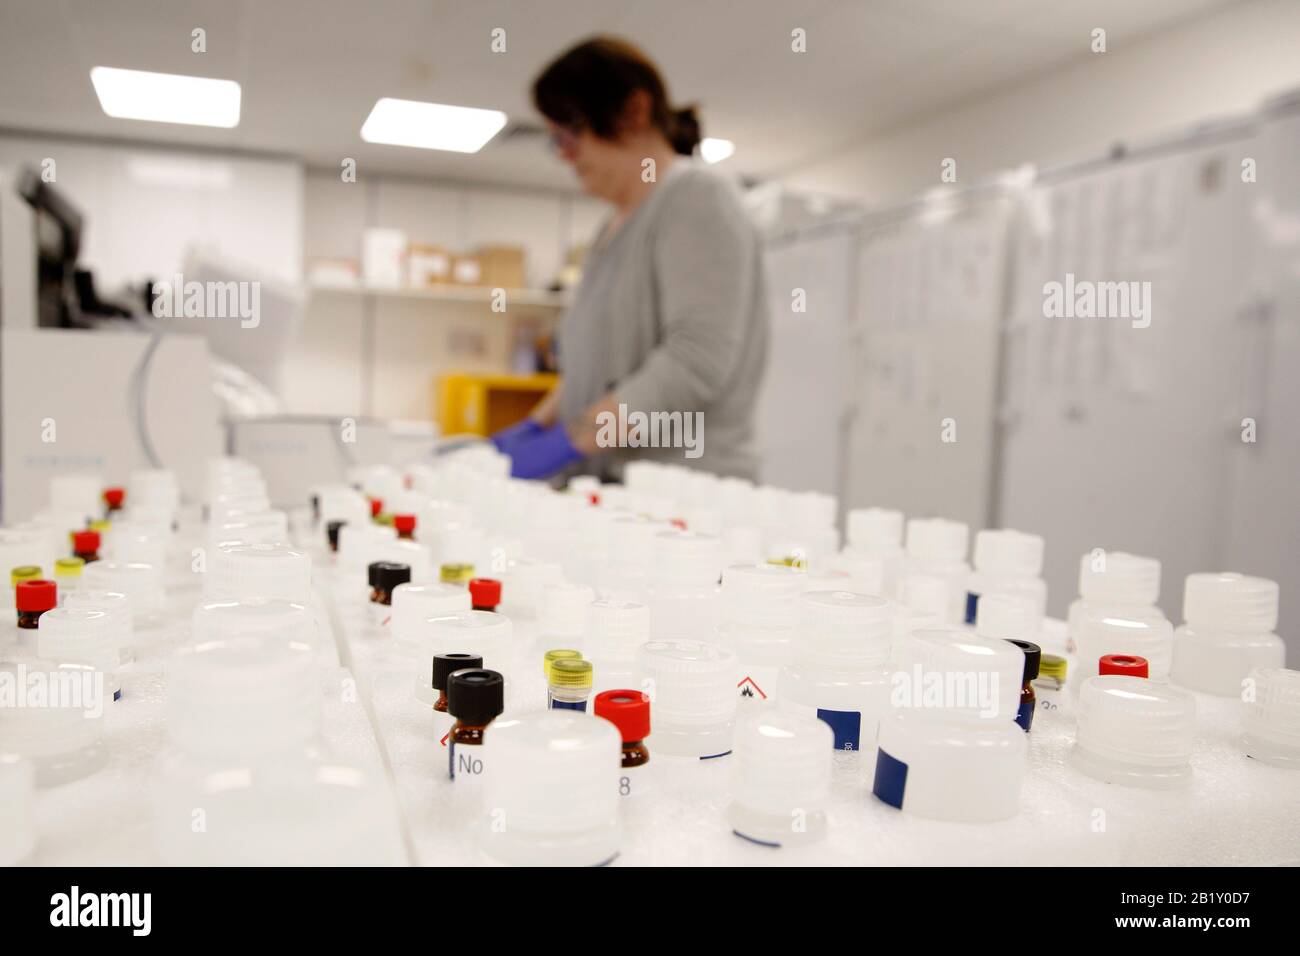 A dispatch assistant packs extraction kits, for taking rna and dna swabs for identification of the presence of coronavirus, at the Primerdesign office Stock Photo